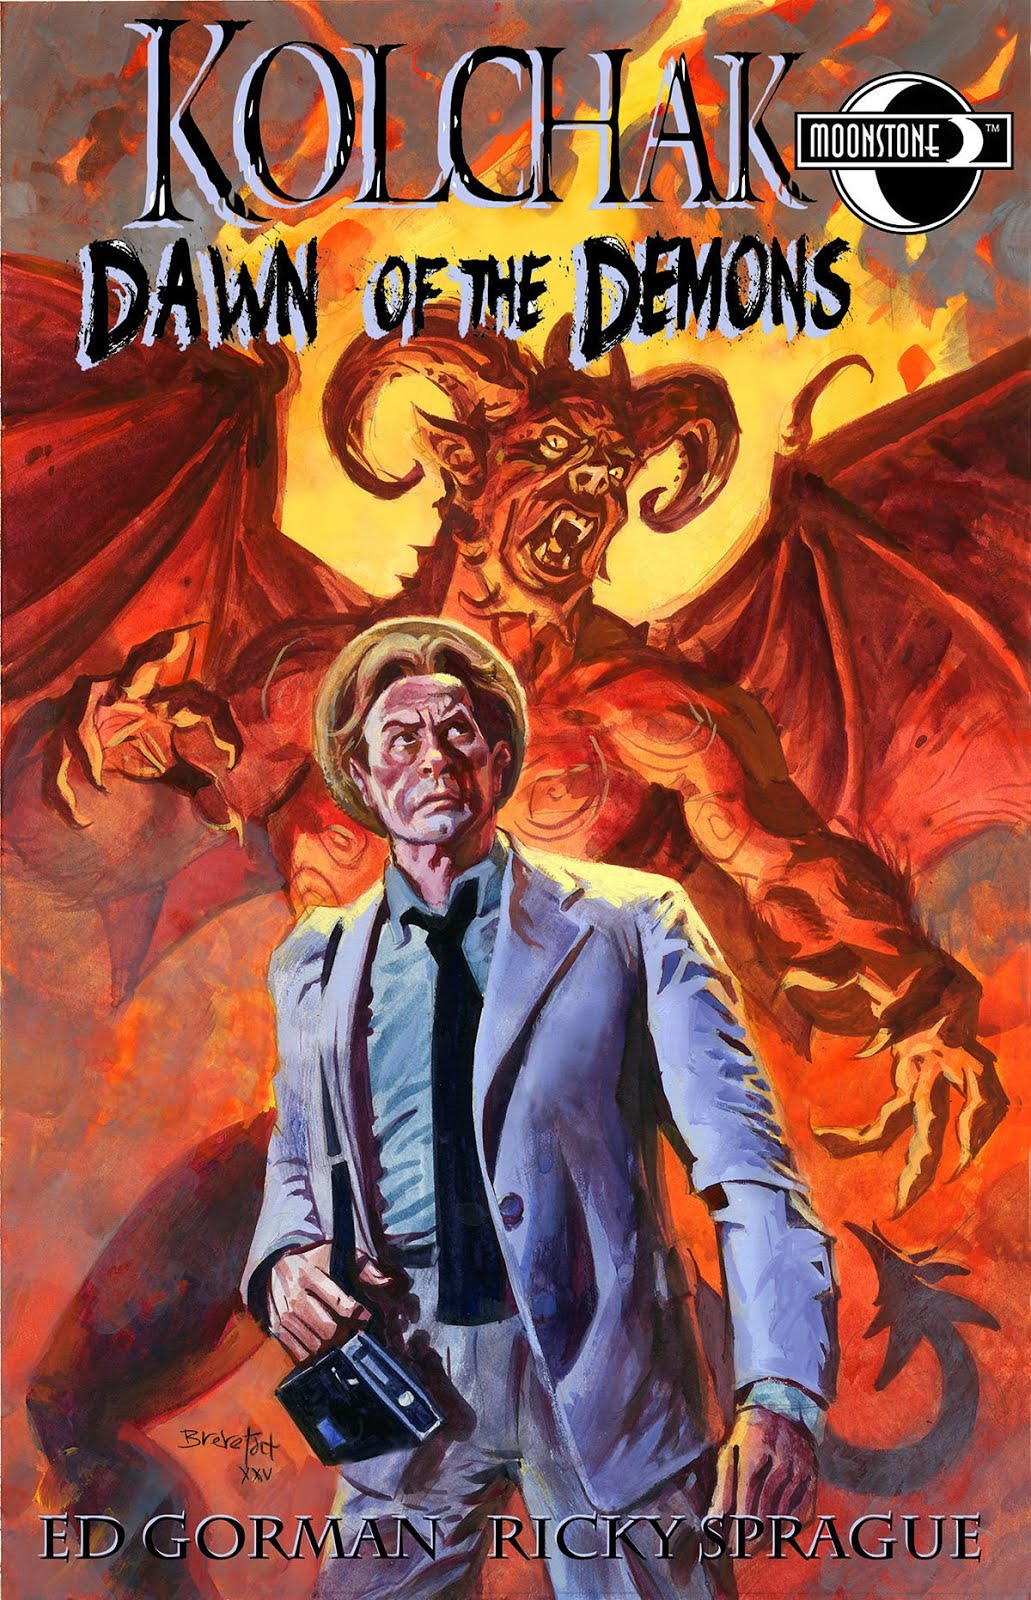 Order Kolchak: Dawn of the Demons from Amazon today!